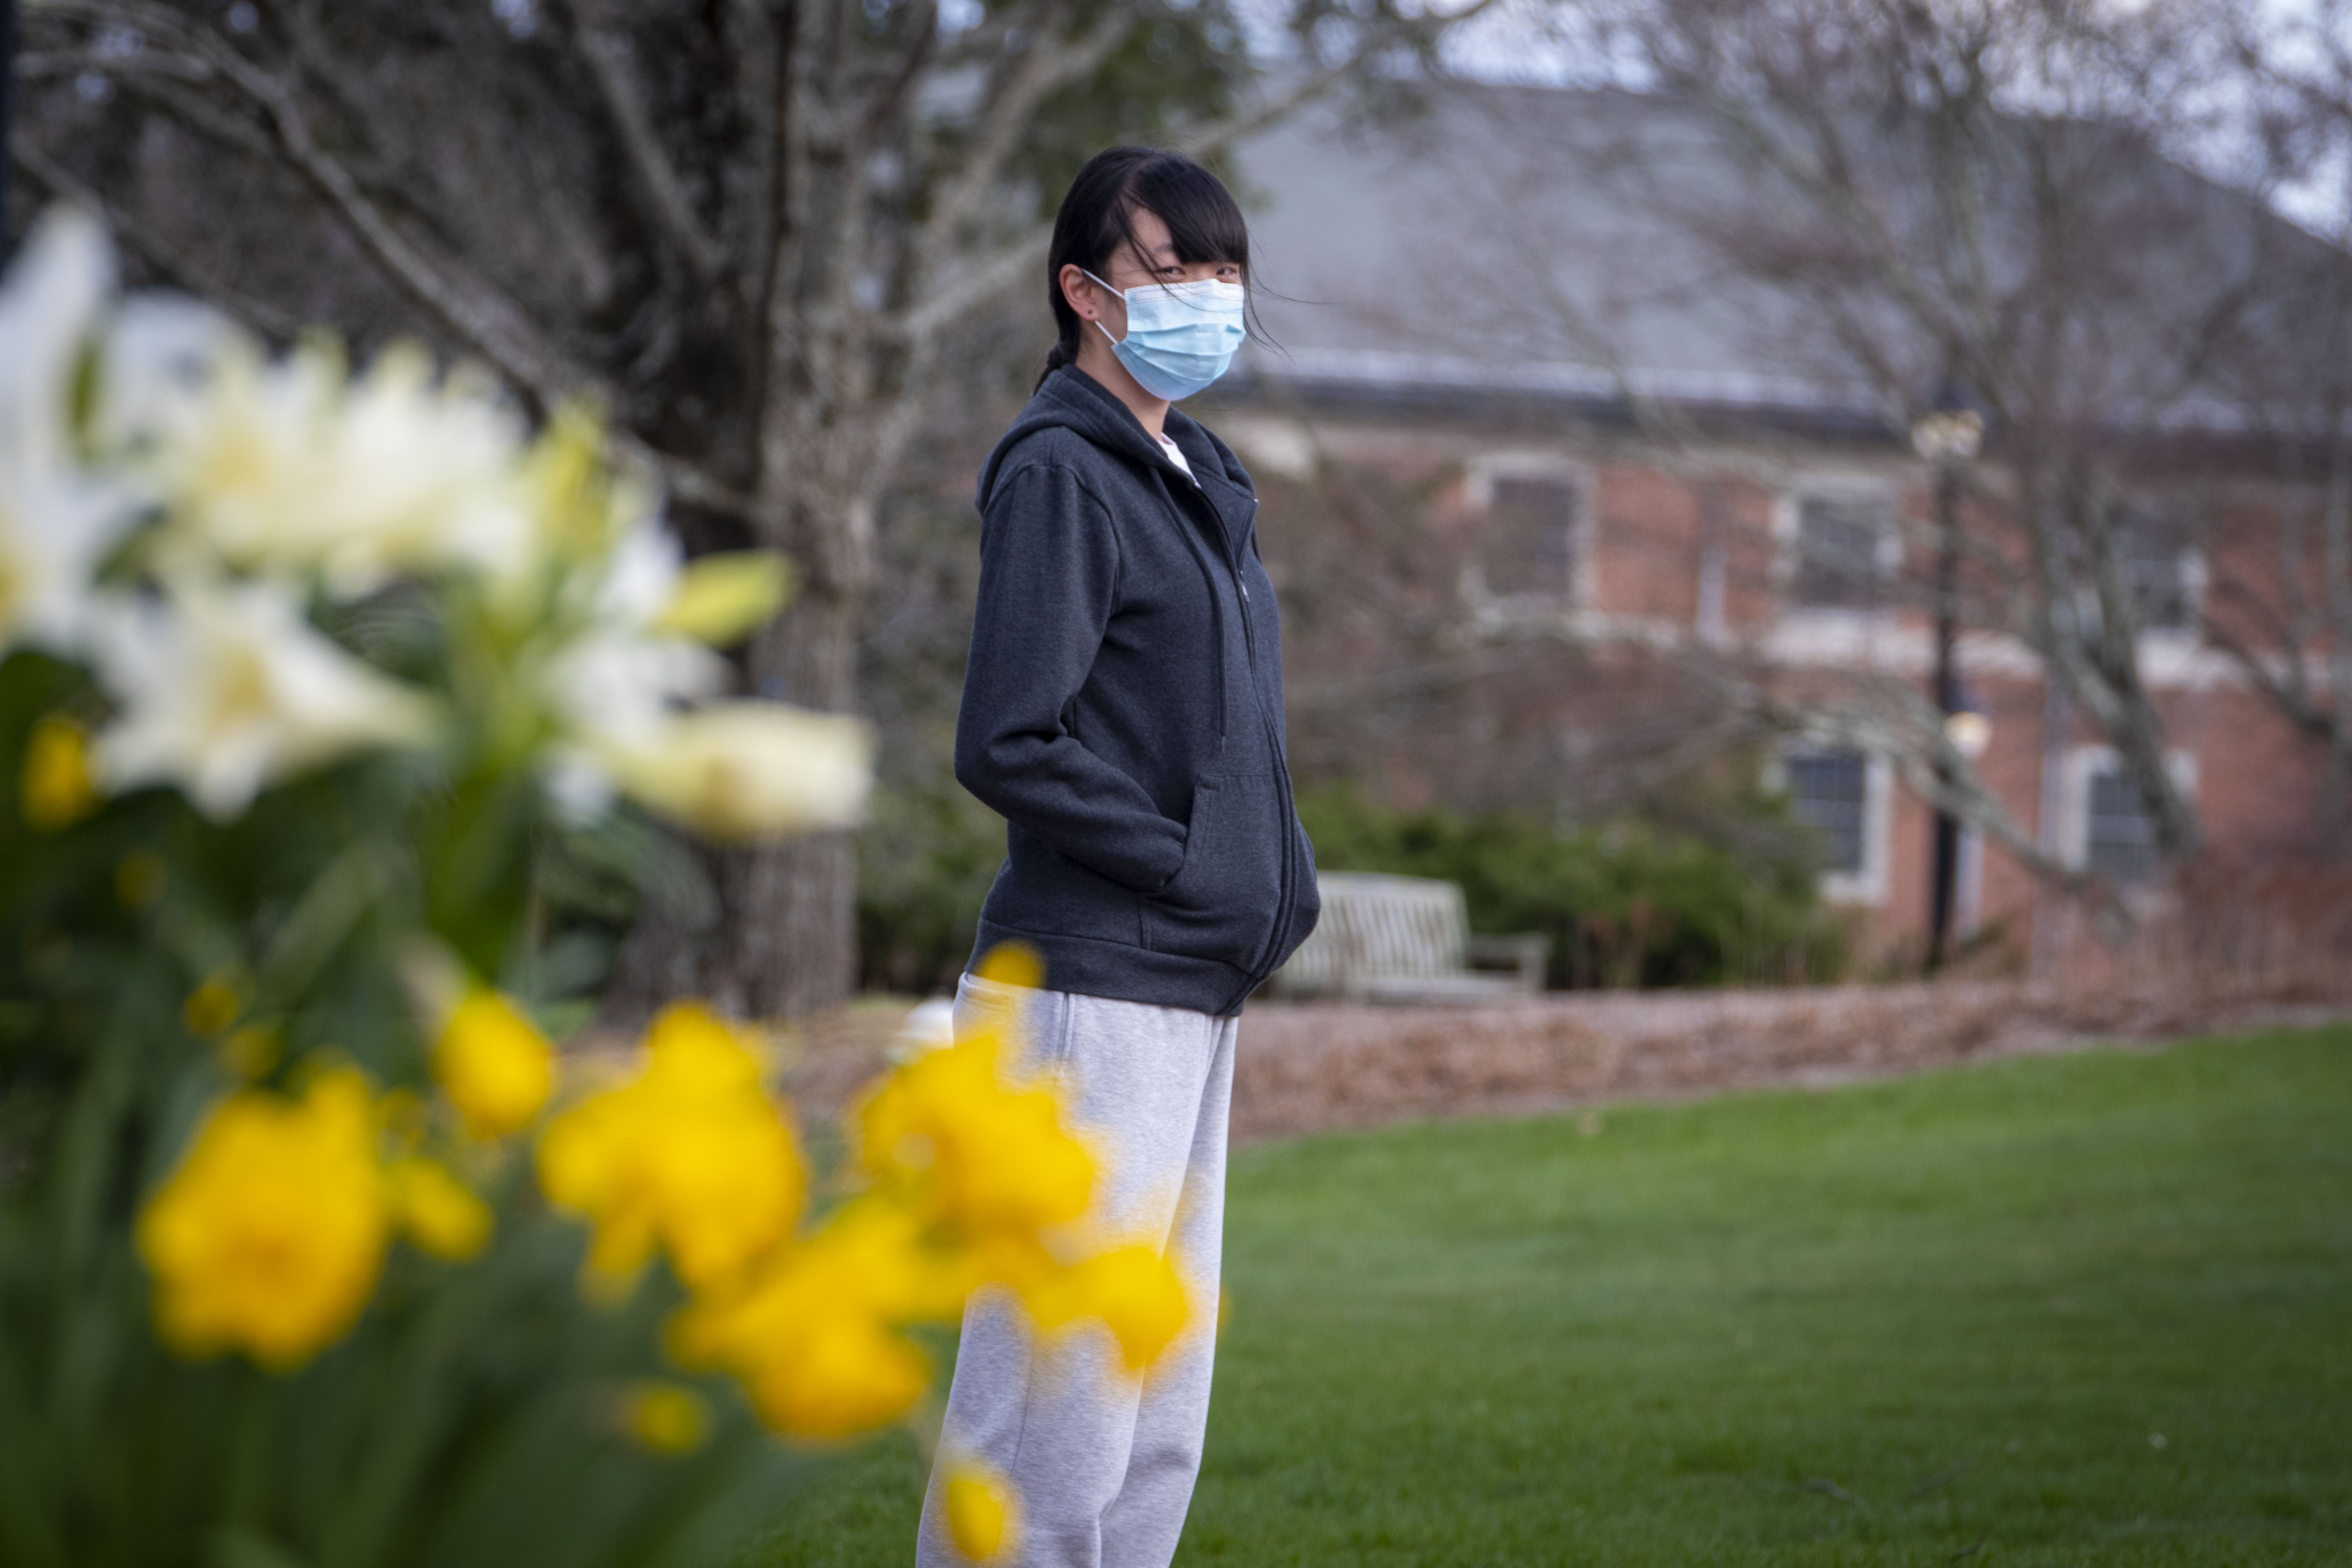 A student in a face mask stands in a mostly deserted part of campus during the COVID-19 pandemic.